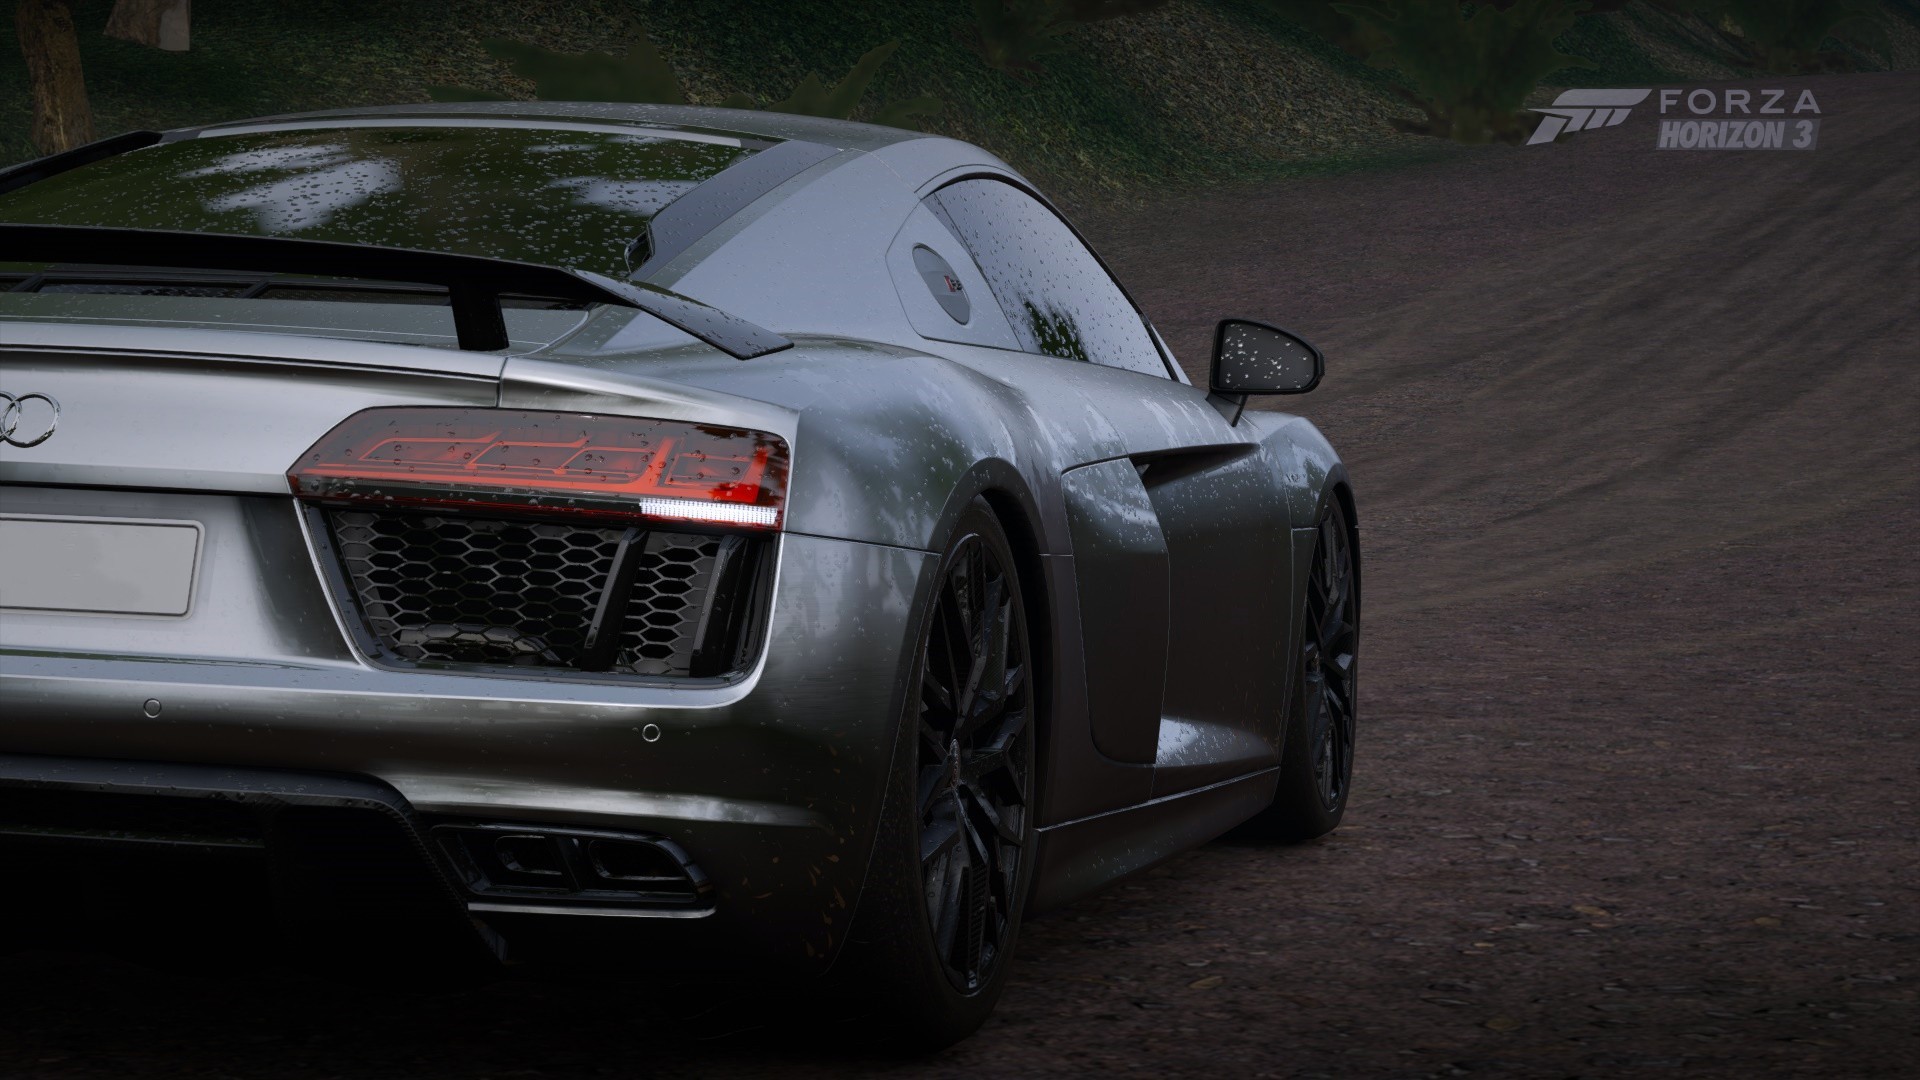 1920x1080 forza horizon 3, Audi R8 V10, Rain, Mud, Supercars Wallpapers HD / Desktop  and Mobile Backgrounds